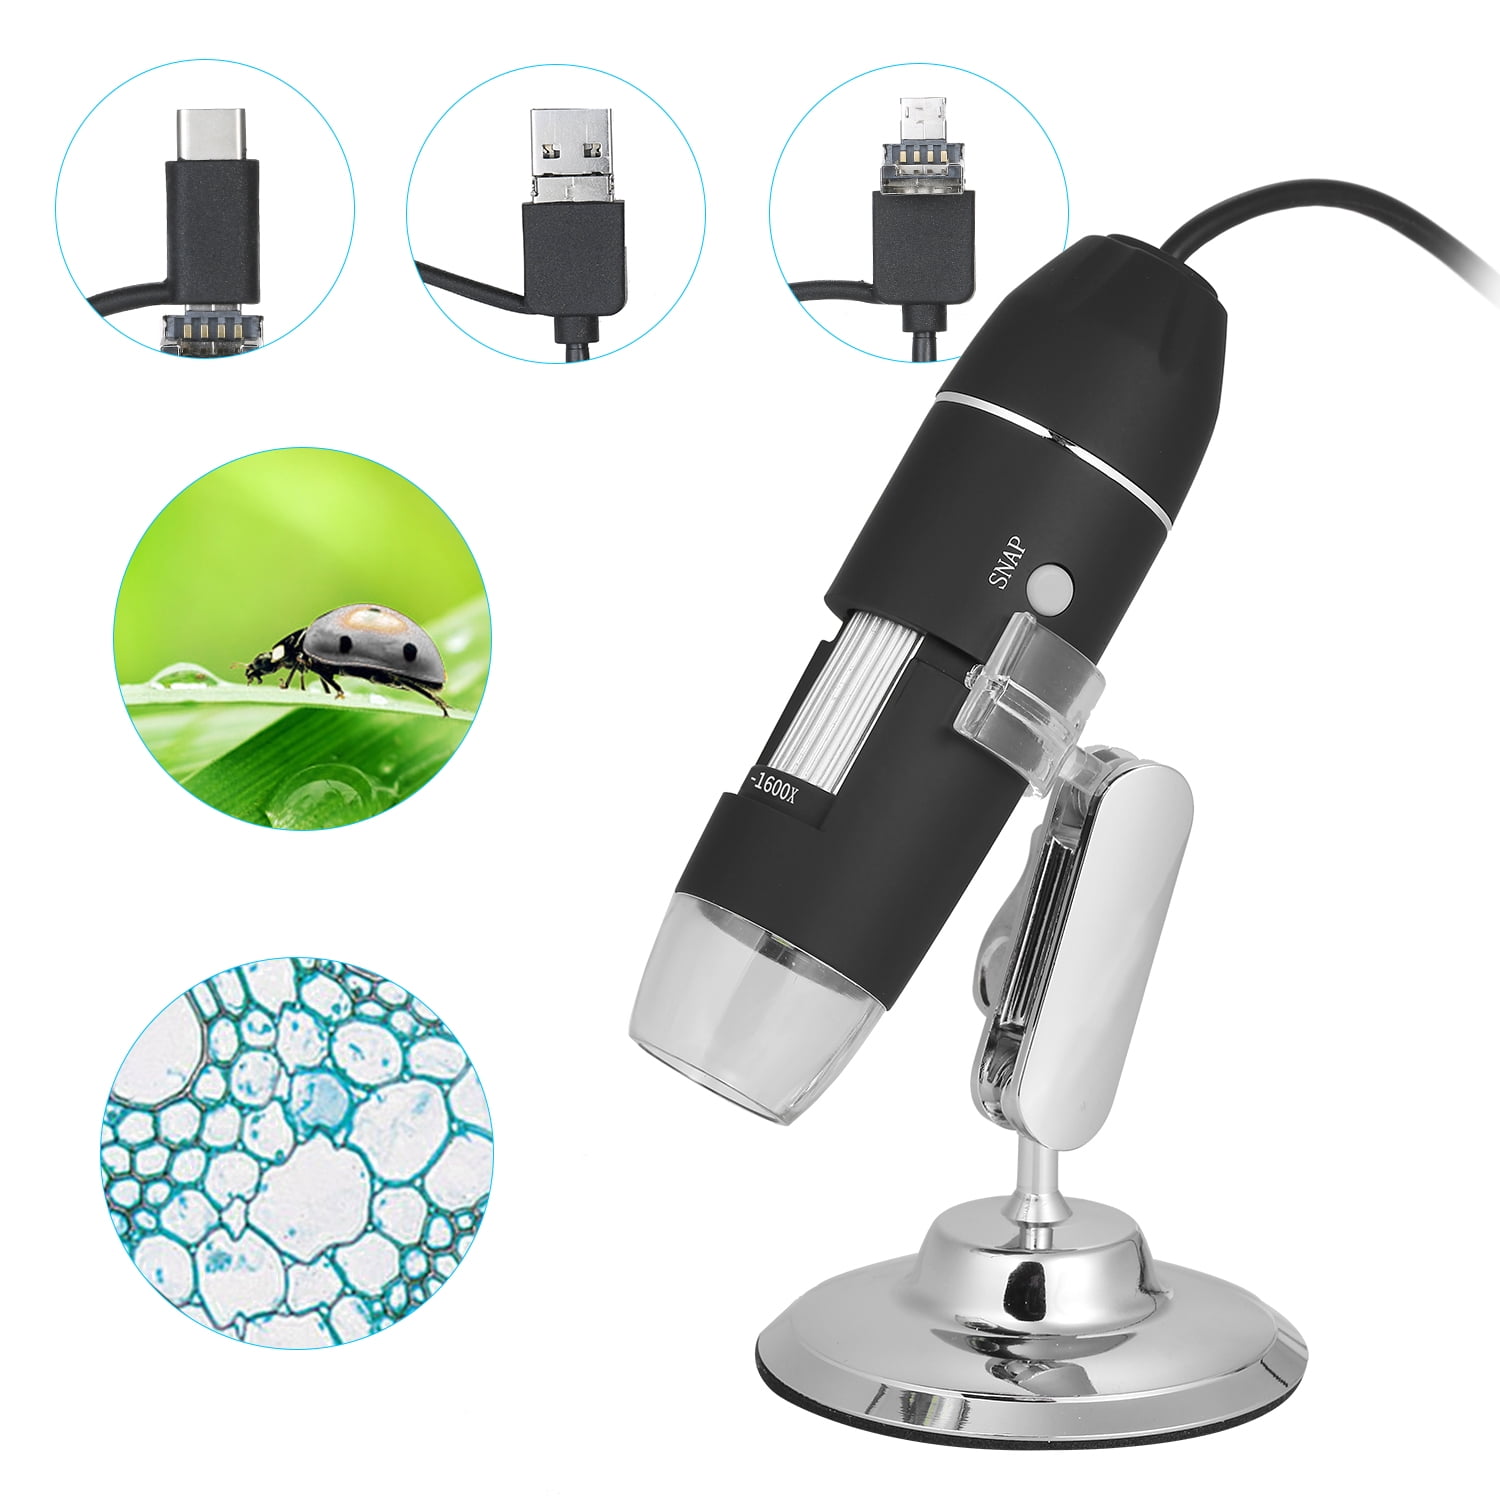 LED Lighted USB Digital Microscope with Flexible Stand and Base Carson eFlex 75x/300x Effective Magnification MM-840 Based on a 21 monitor White